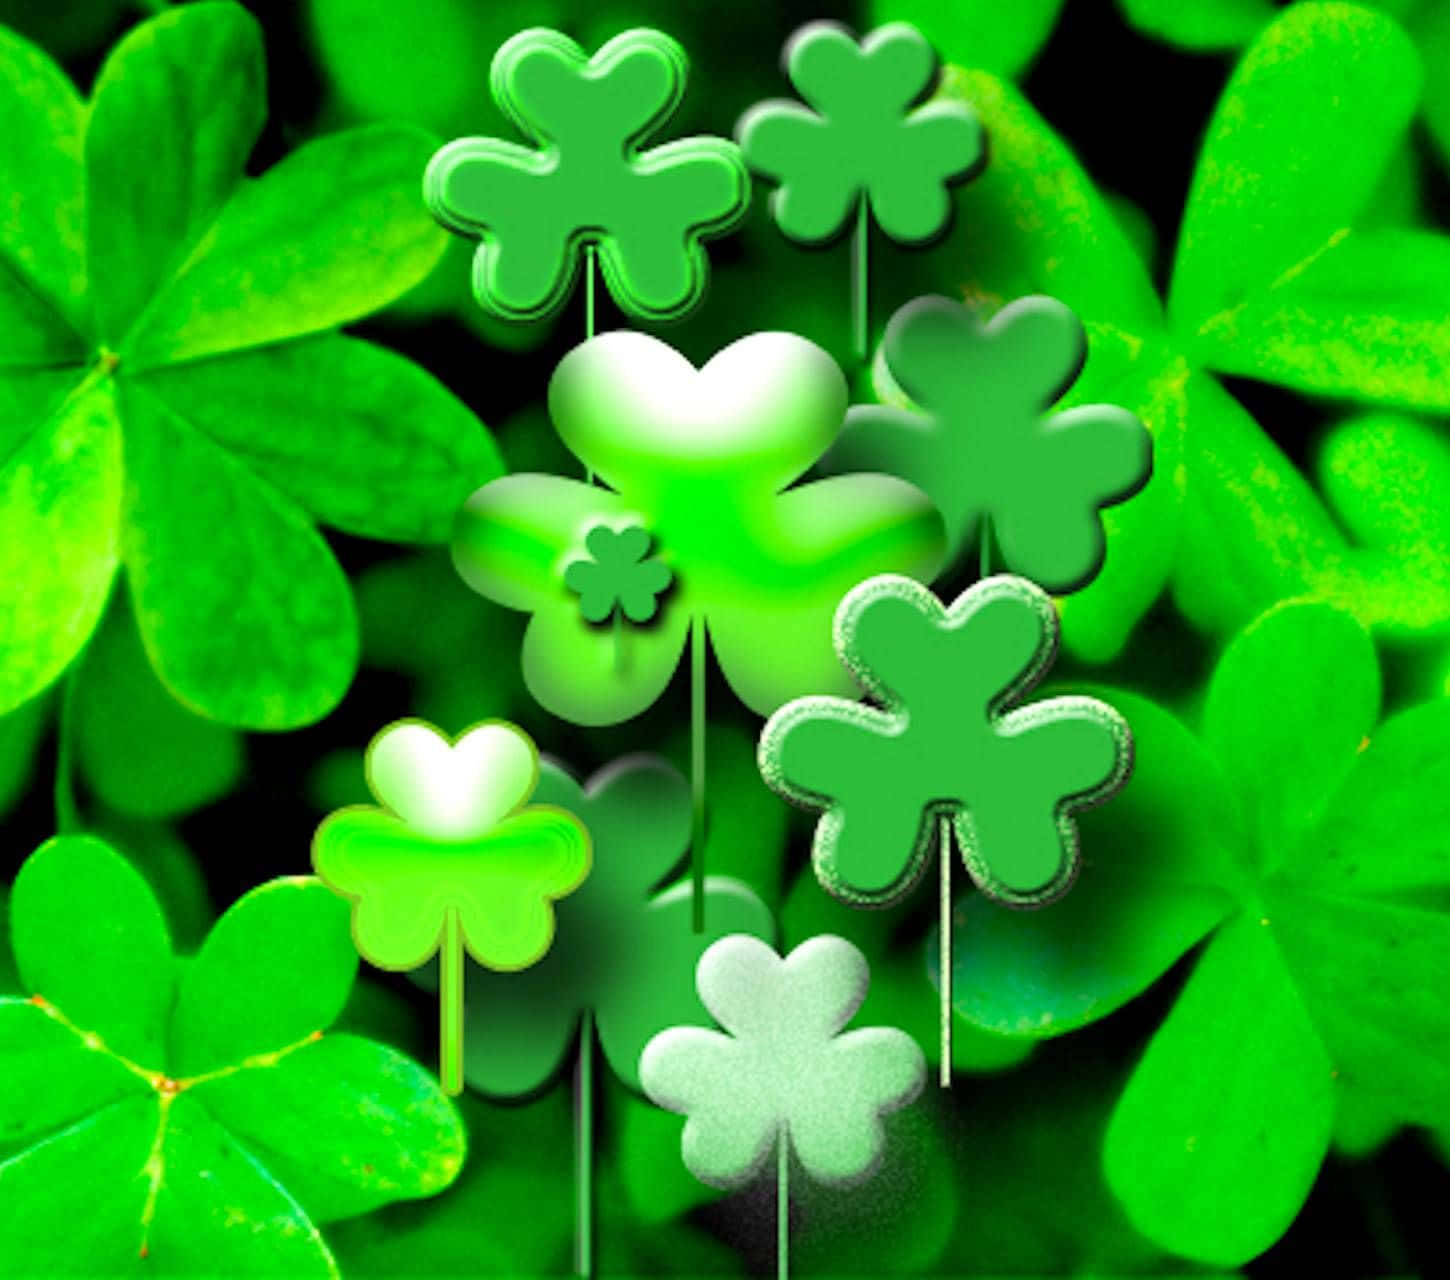 The luck of the Irish: Celebrate with a Shamrock Wallpaper